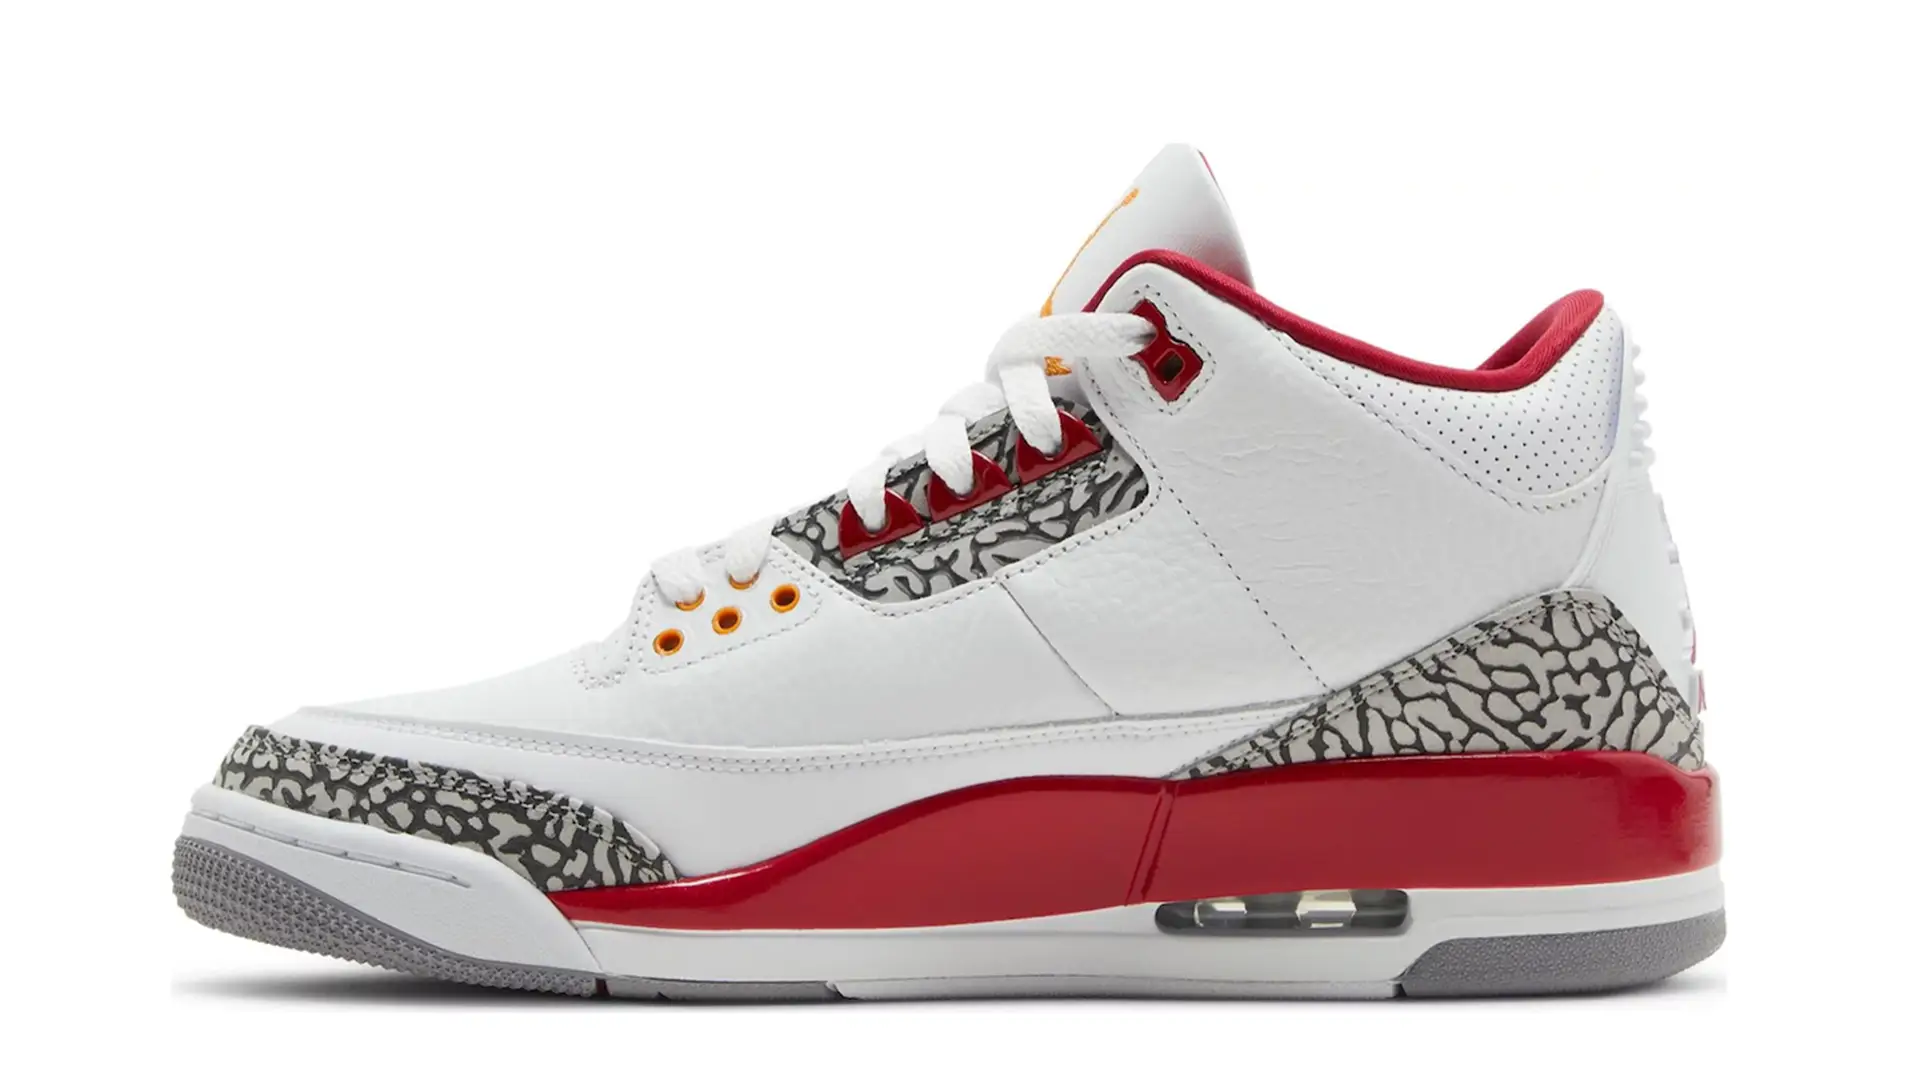 Here's How to Cop the Air Jordan 3 